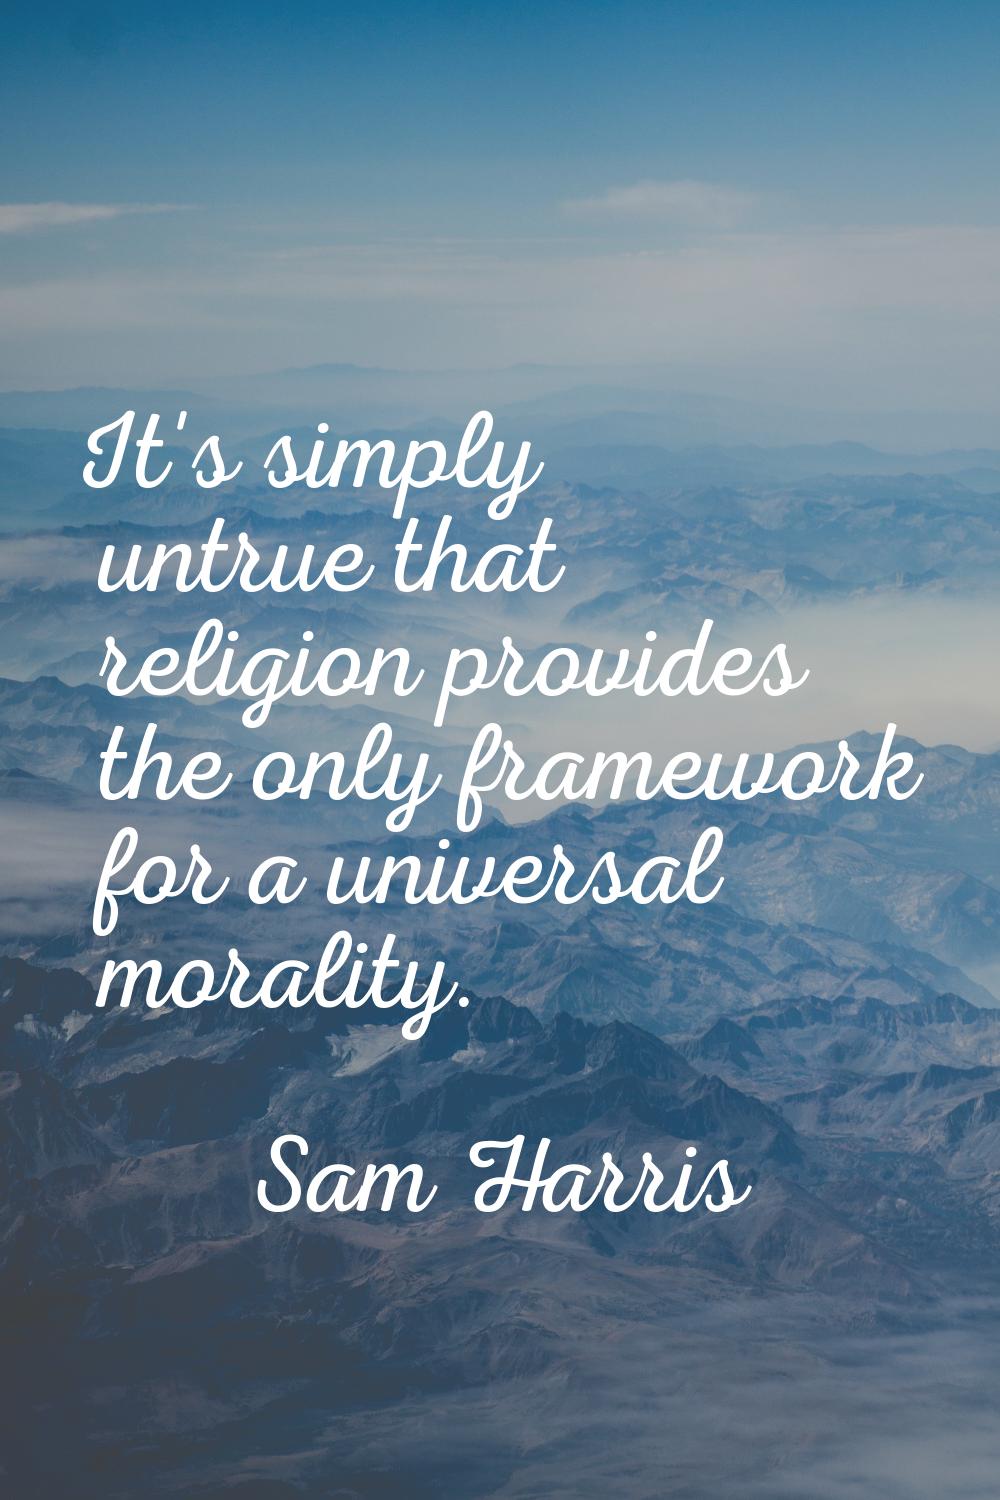 It's simply untrue that religion provides the only framework for a universal morality.